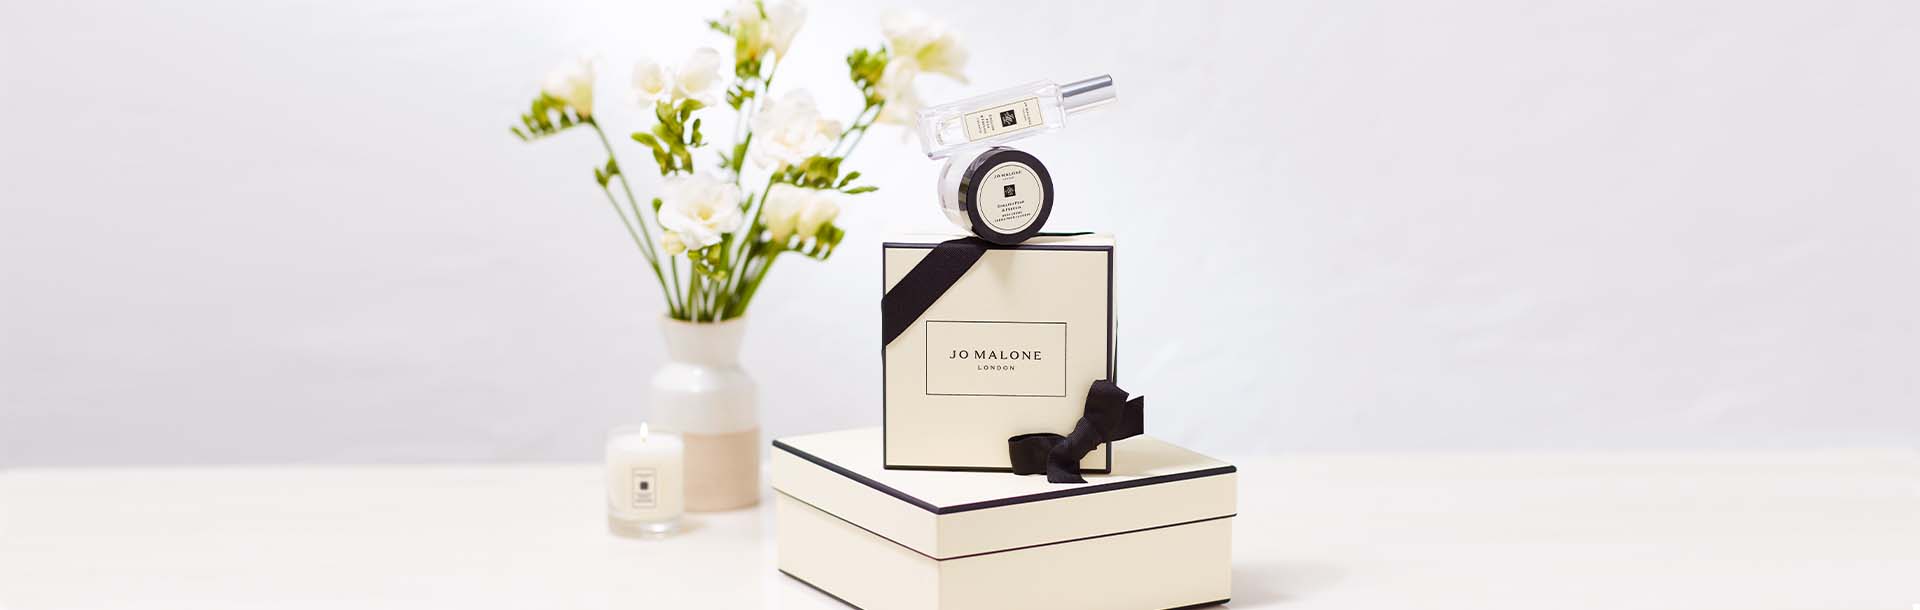 image of jo malone cream and black boxes stacked with a body creme balanced on top and flowers in a vase behind